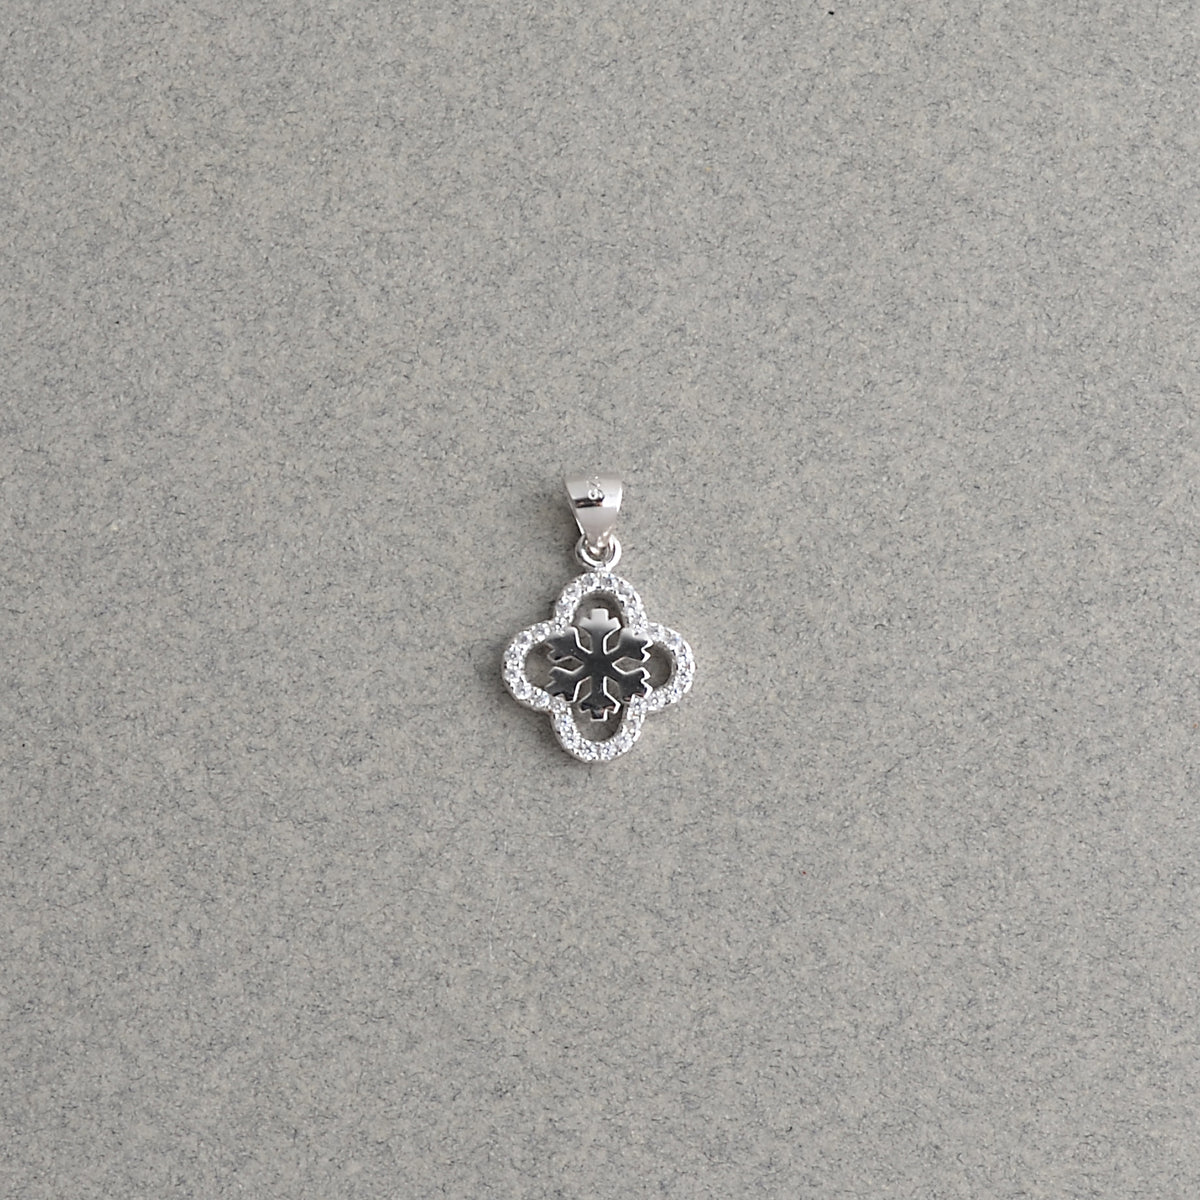 Snowflake in Four-Leaf Clover Pendant